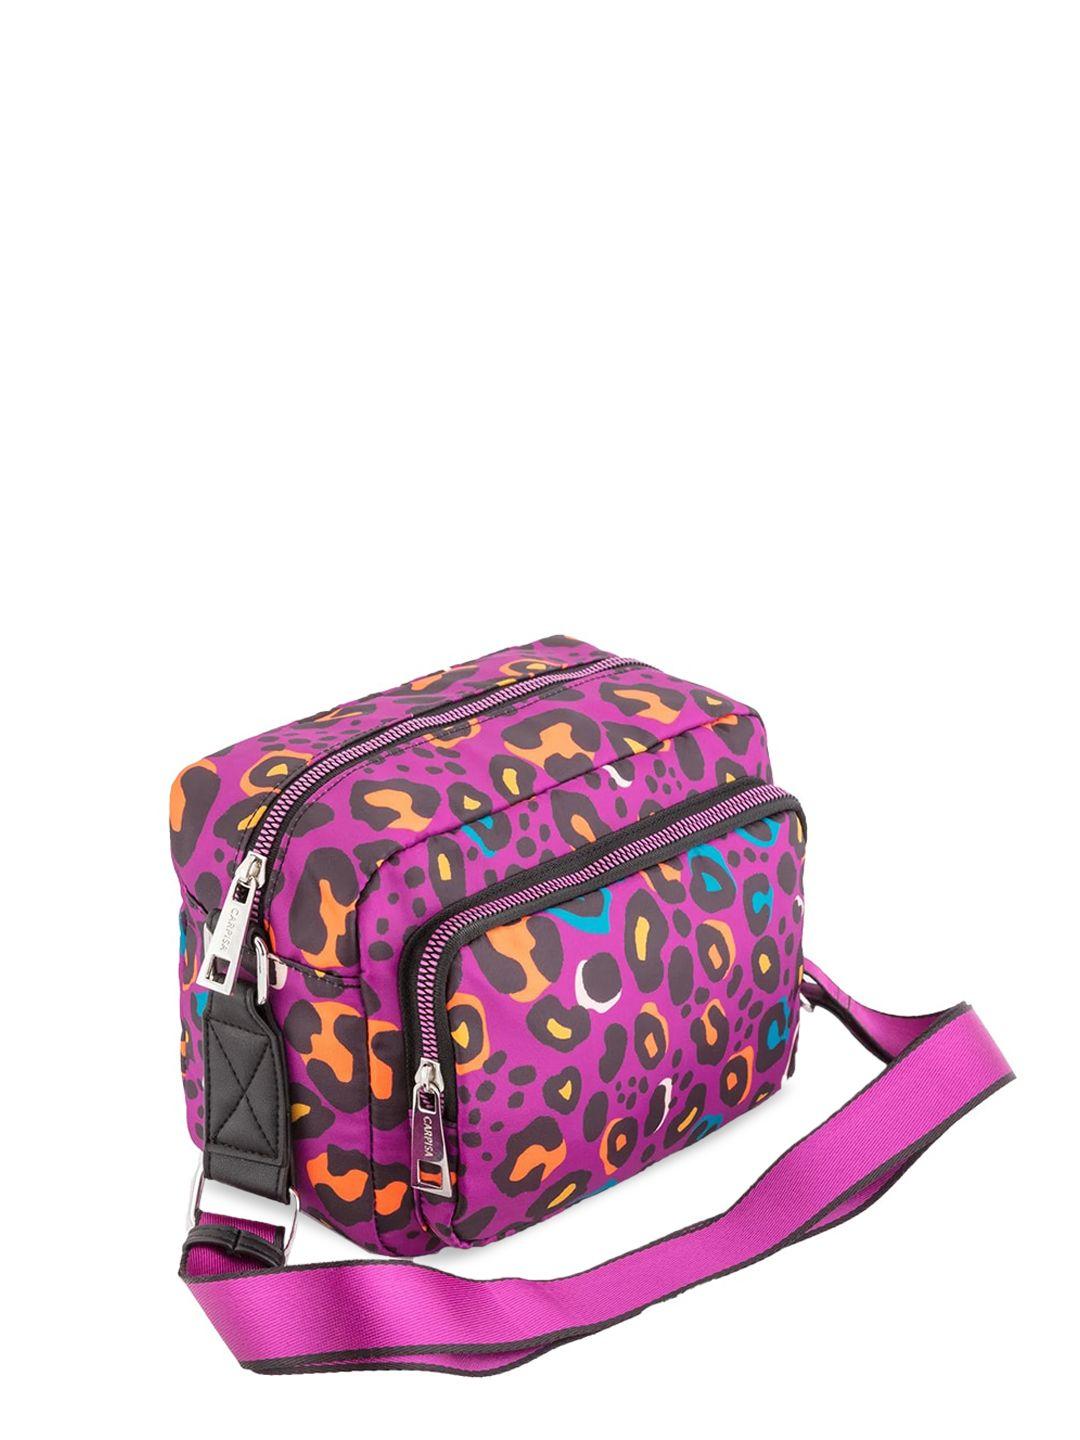 carpisa abstract printed structured sling bag